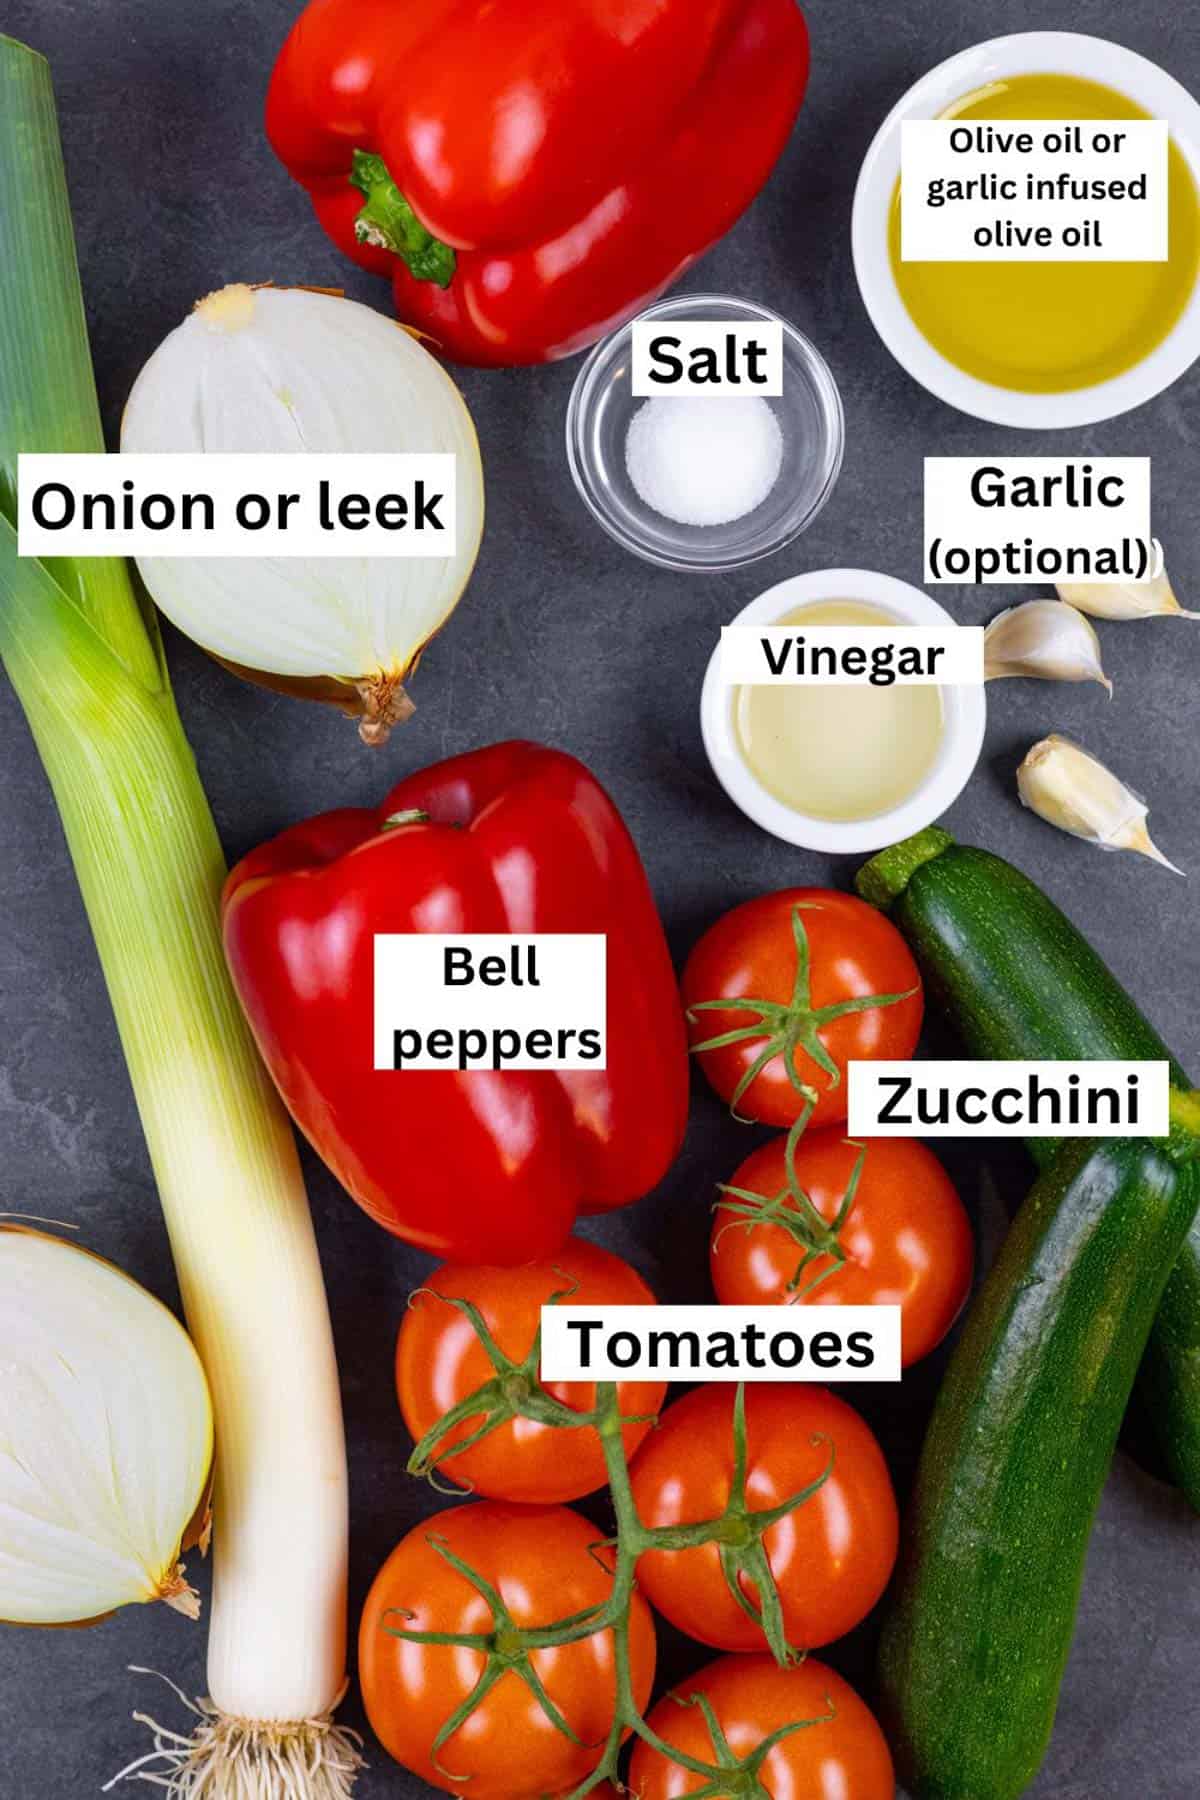 Labeled ingredients for Pisto Manchego.